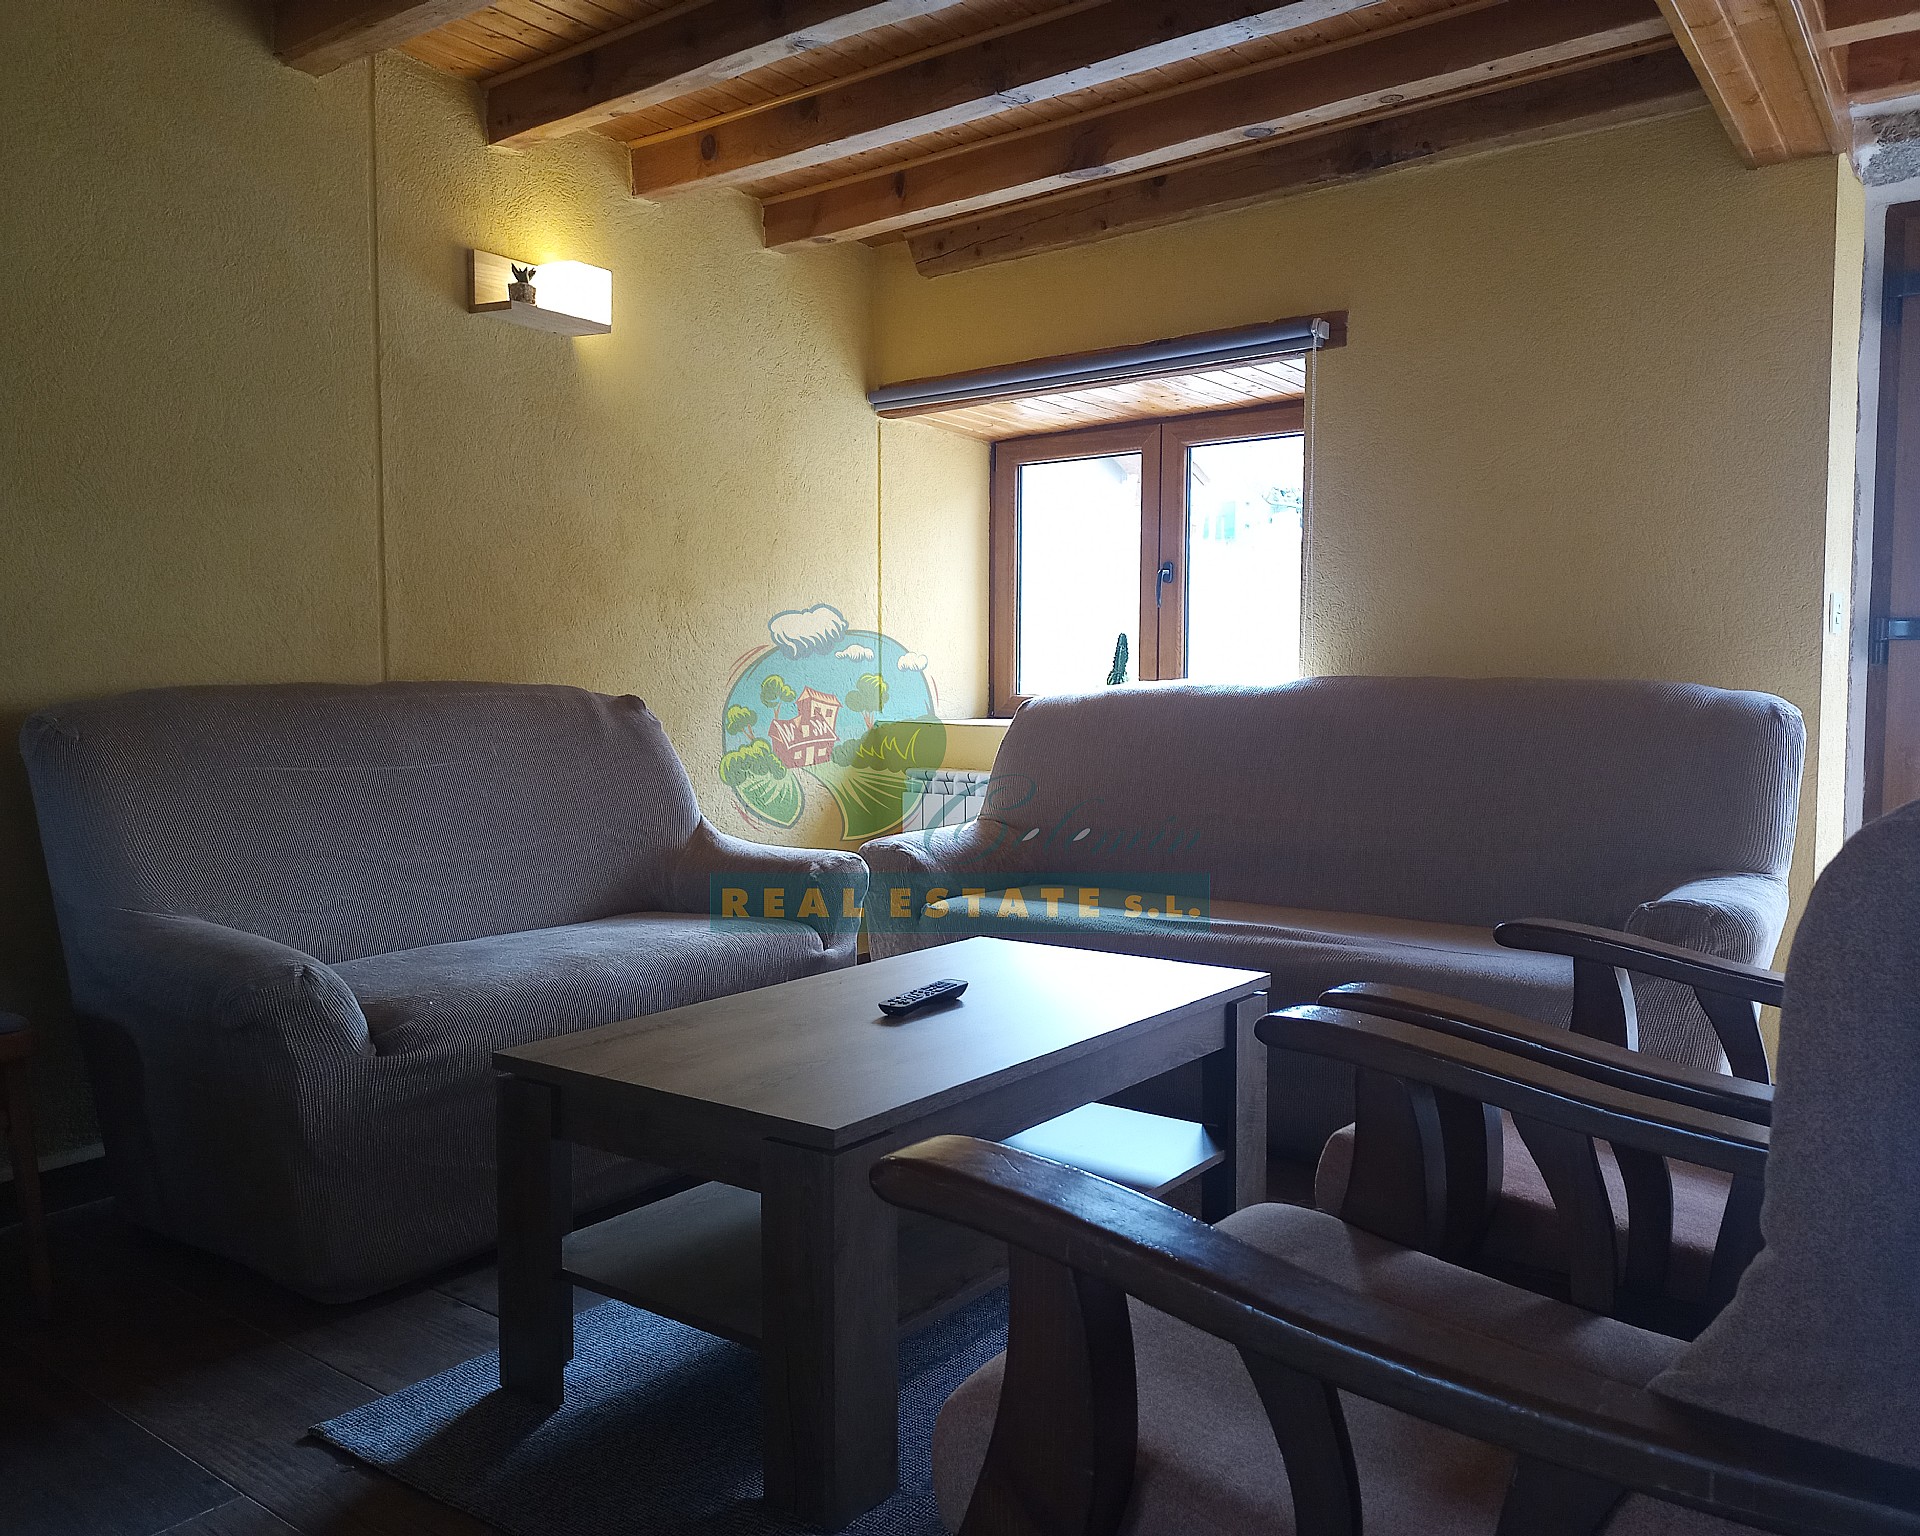 Detached house with garden, garage and view to Sierra de Gredos. 